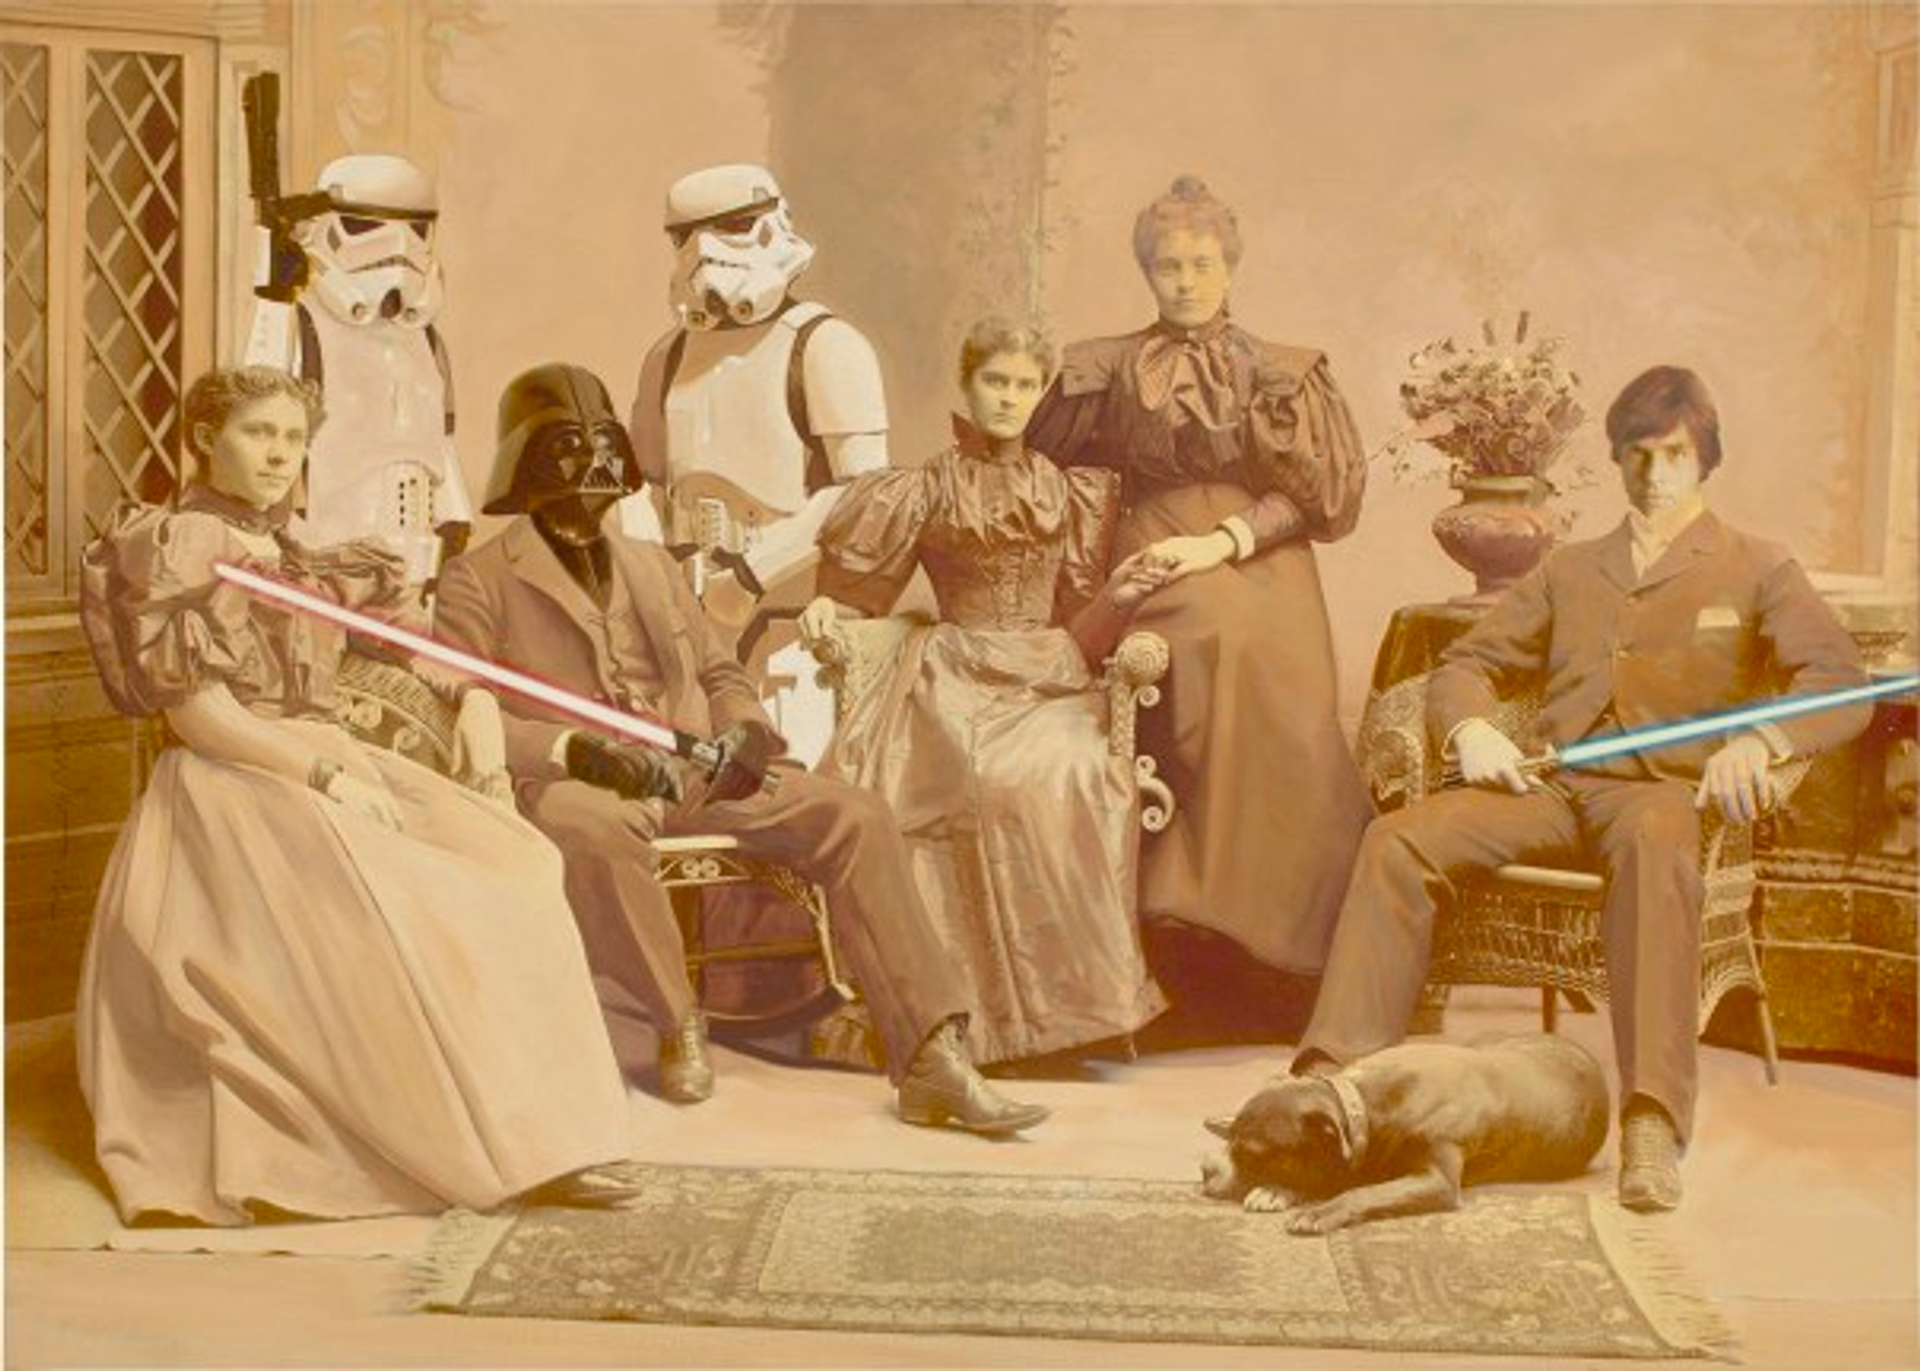 A screenprint artwork featuring Star Wars characters positioned similarly to Diego Velasquez's renowned painting "Las Meninas." The characters are superimposed on the canvas, creating an intriguing visual juxtaposition.